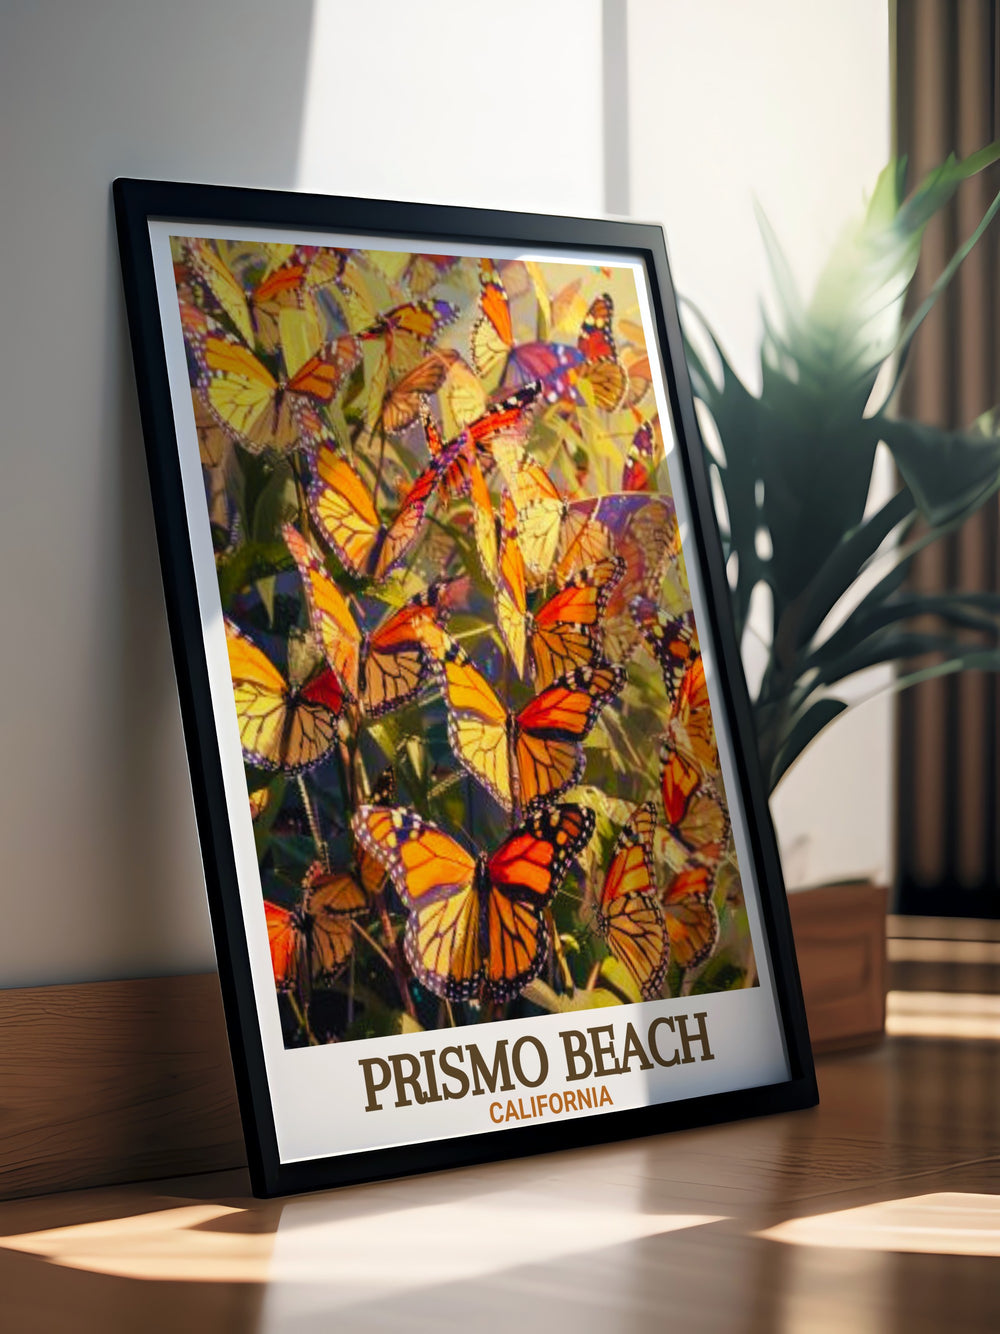 Beautiful Pismo Beach Art in a California Print ideal for adding coastal charm to your living space Monarch Butterfly Grove artwork brings elegance and tranquility to any room